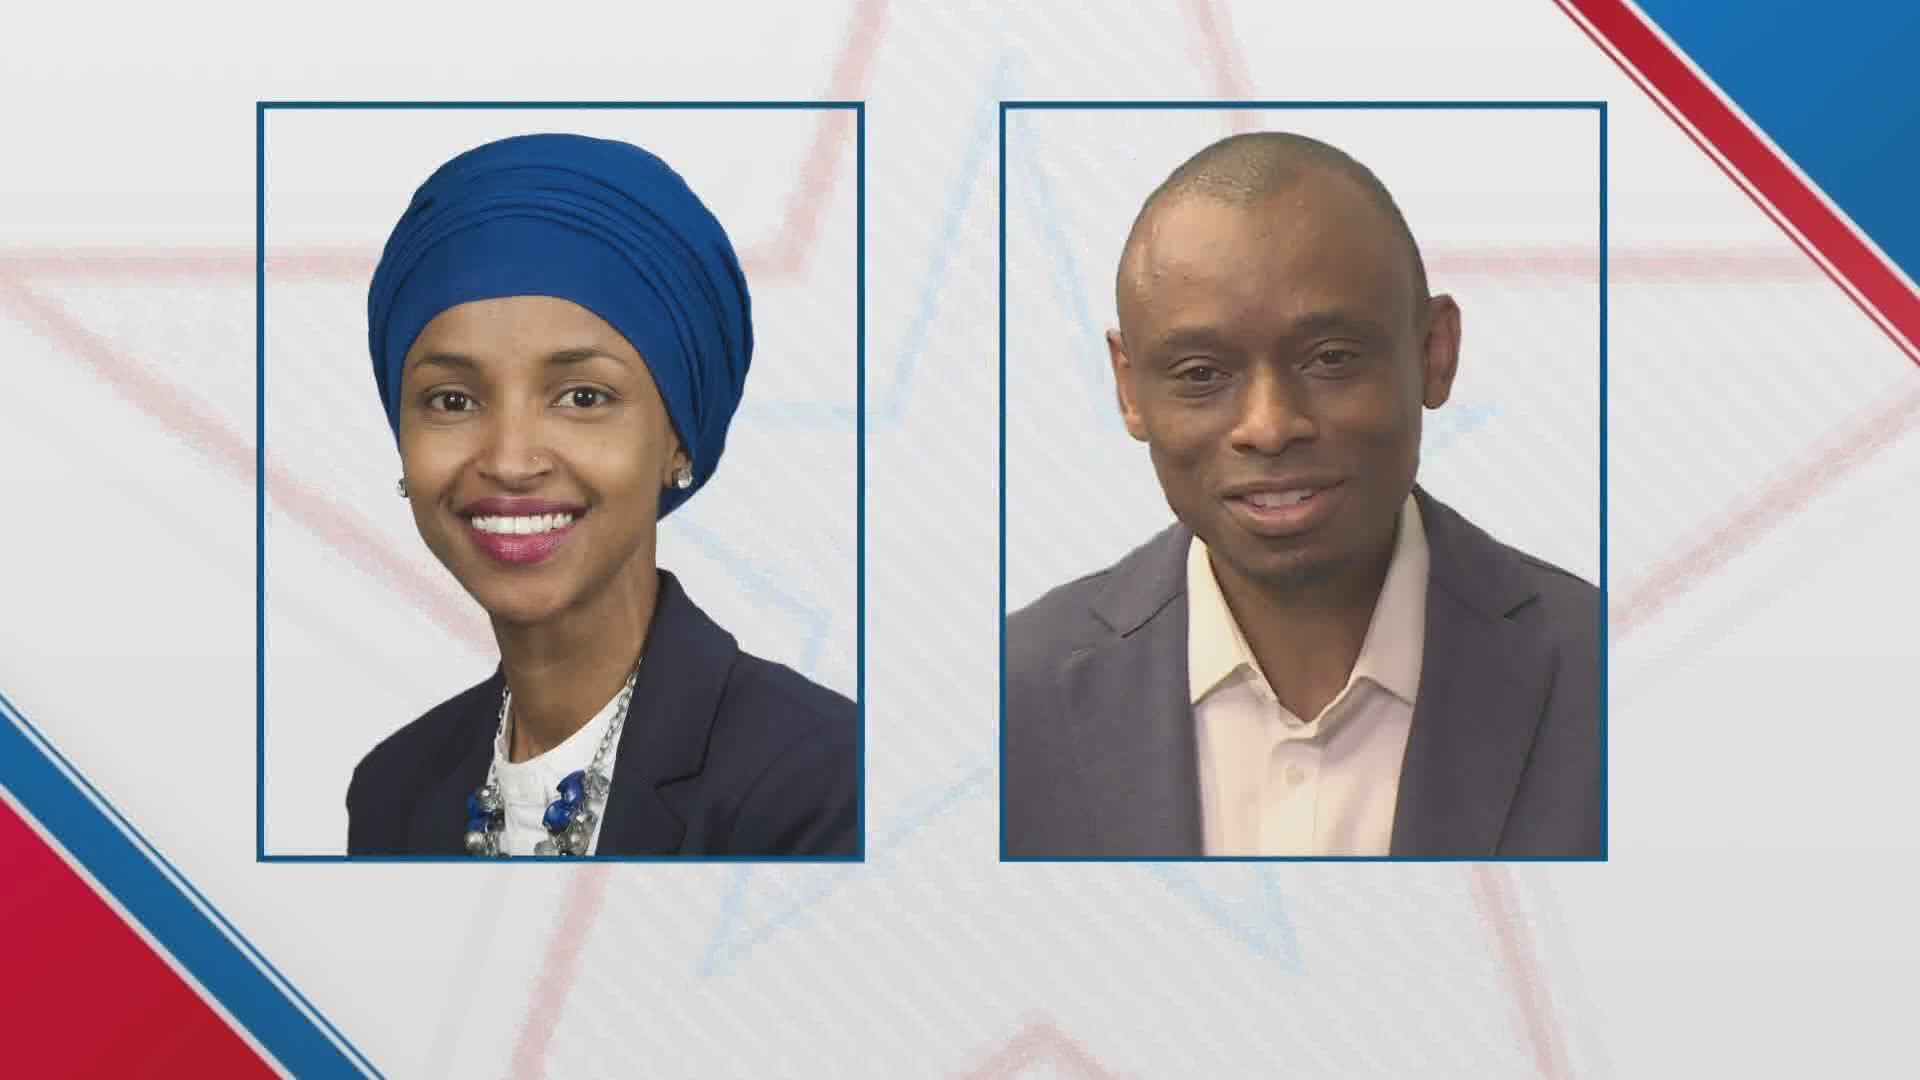 Rep. Ilhan Omar and her top rival in the upcoming DFL primary, Antone Melton-Meaux, held dueling new conferences to showcase supporters and land some punches